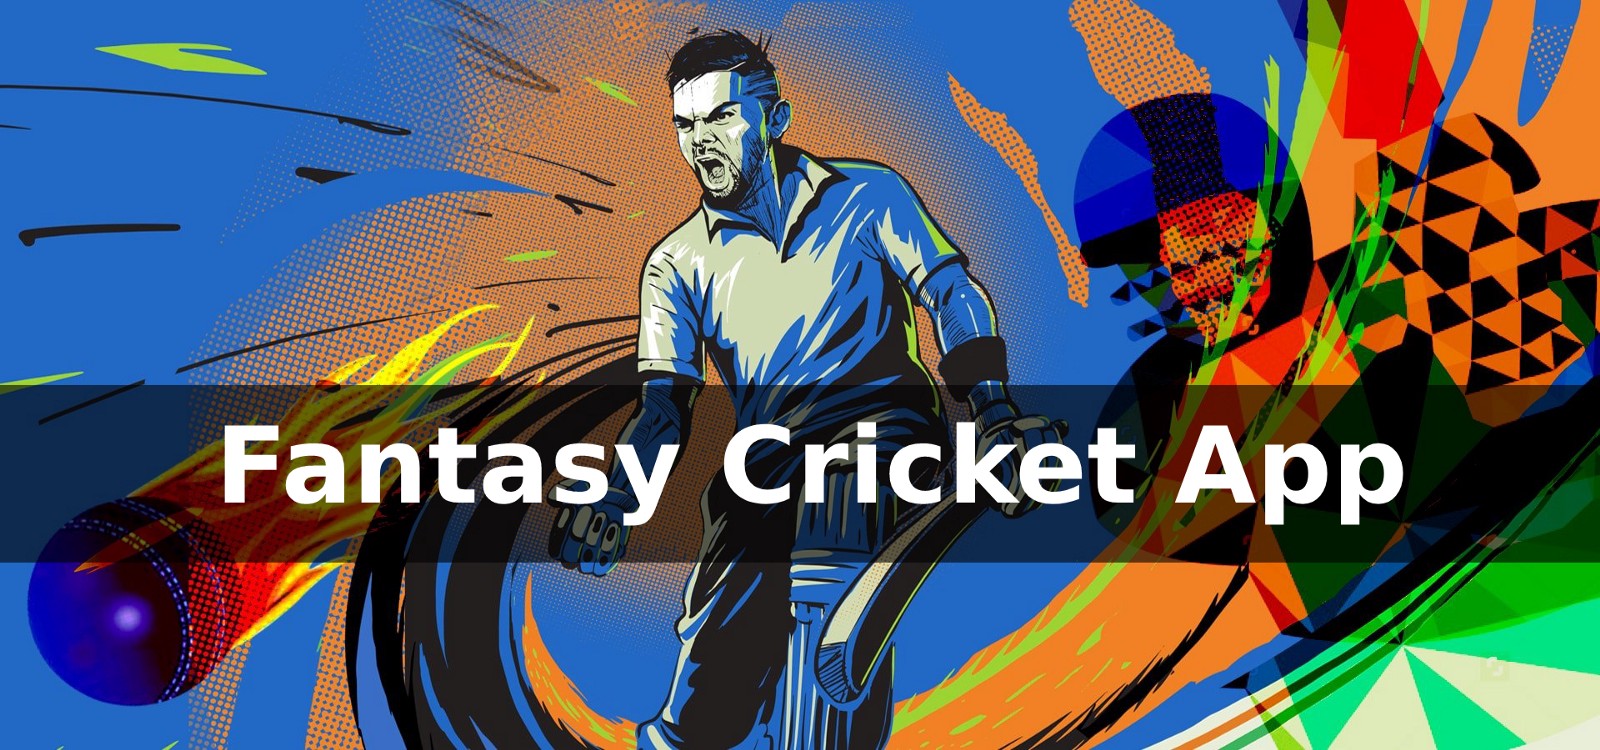 Why This Is The Perfect Time To Launch A Fantasy-Based Cricket App